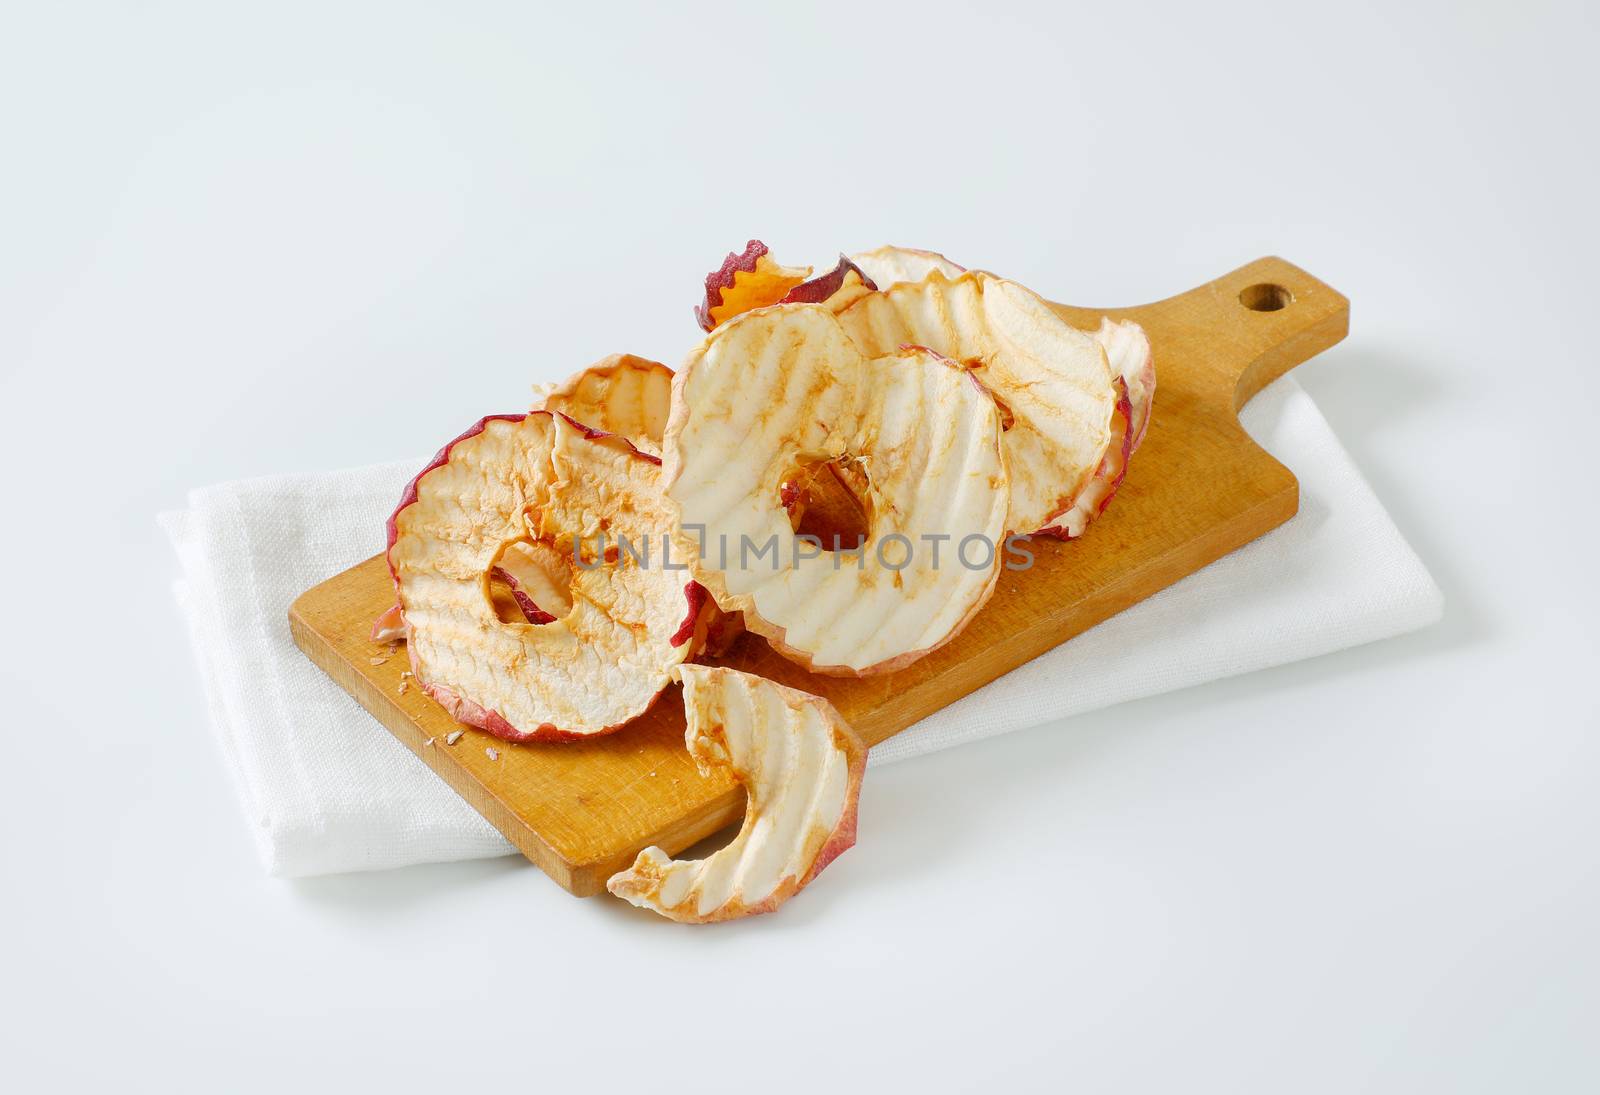 Dried apple slices by Digifoodstock